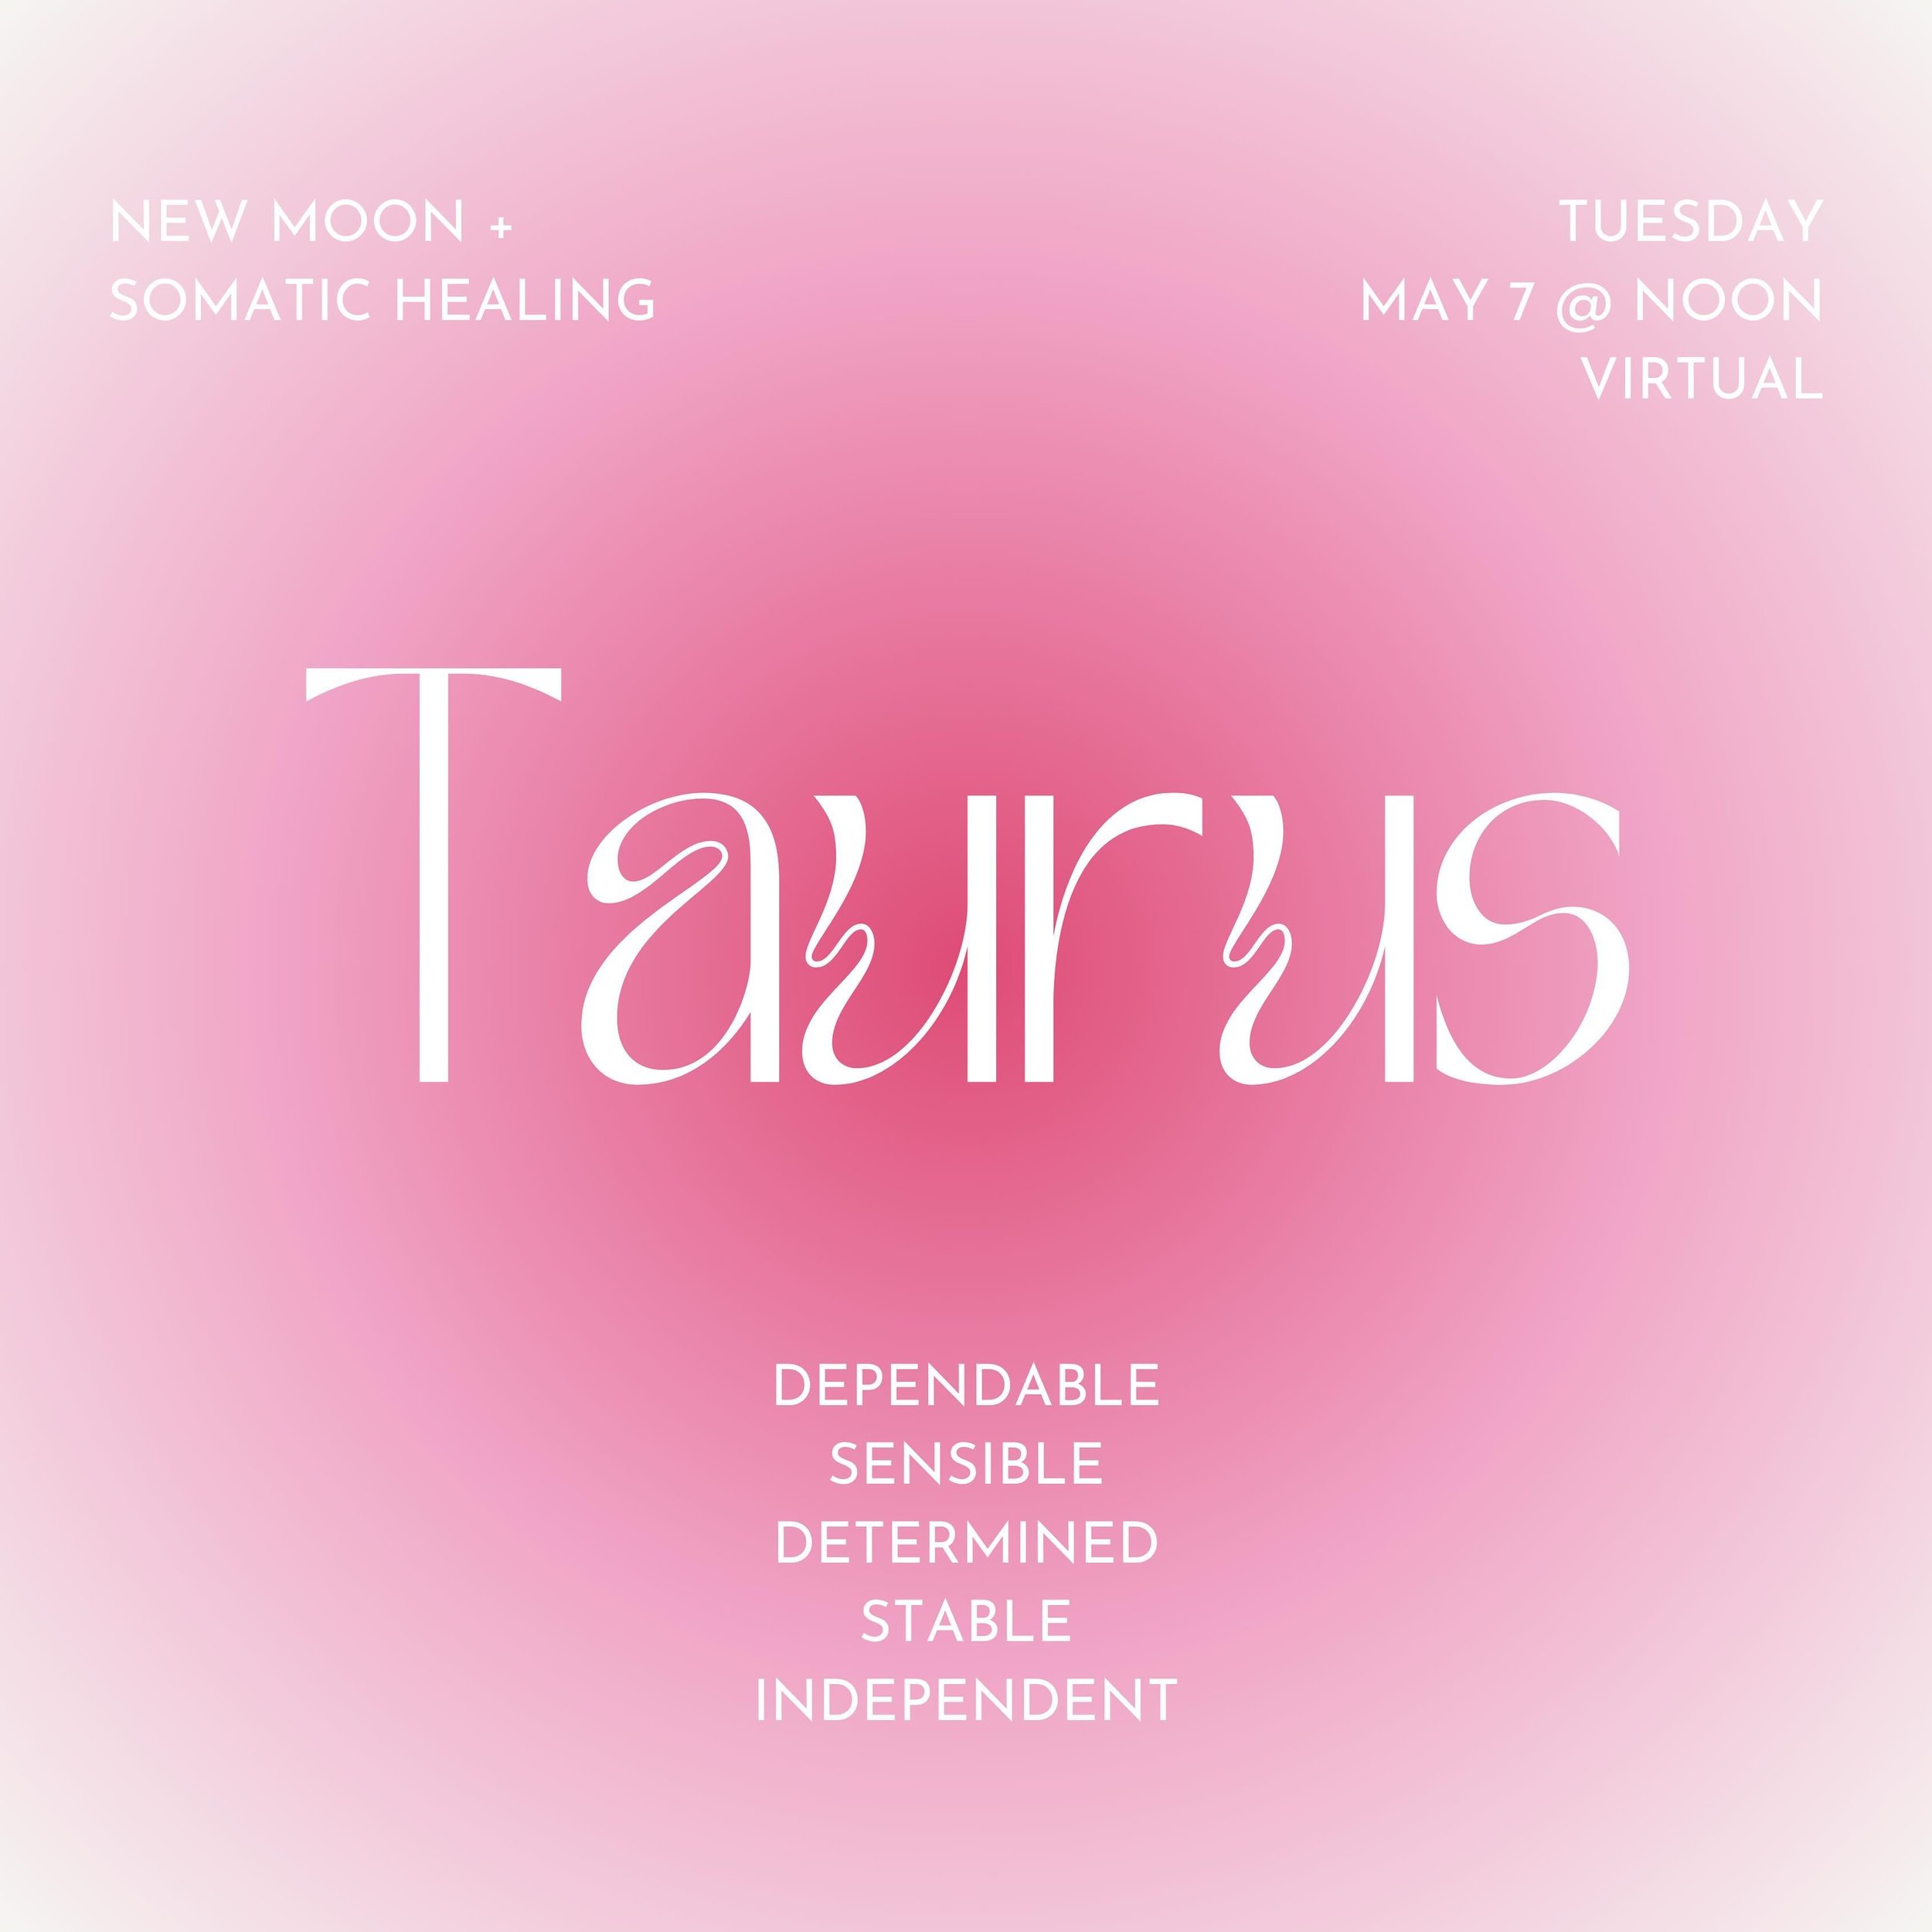 NEW MOON AND SOMATIC HEALING

Price: $15-$33 suggested donation
Date: Tuesday, May 7, 2024
Time: 12:00 - 1:15 p.m. EST
Link in bio ✨❤️

Virtual and recorded for replay. 

Hope to see you there!